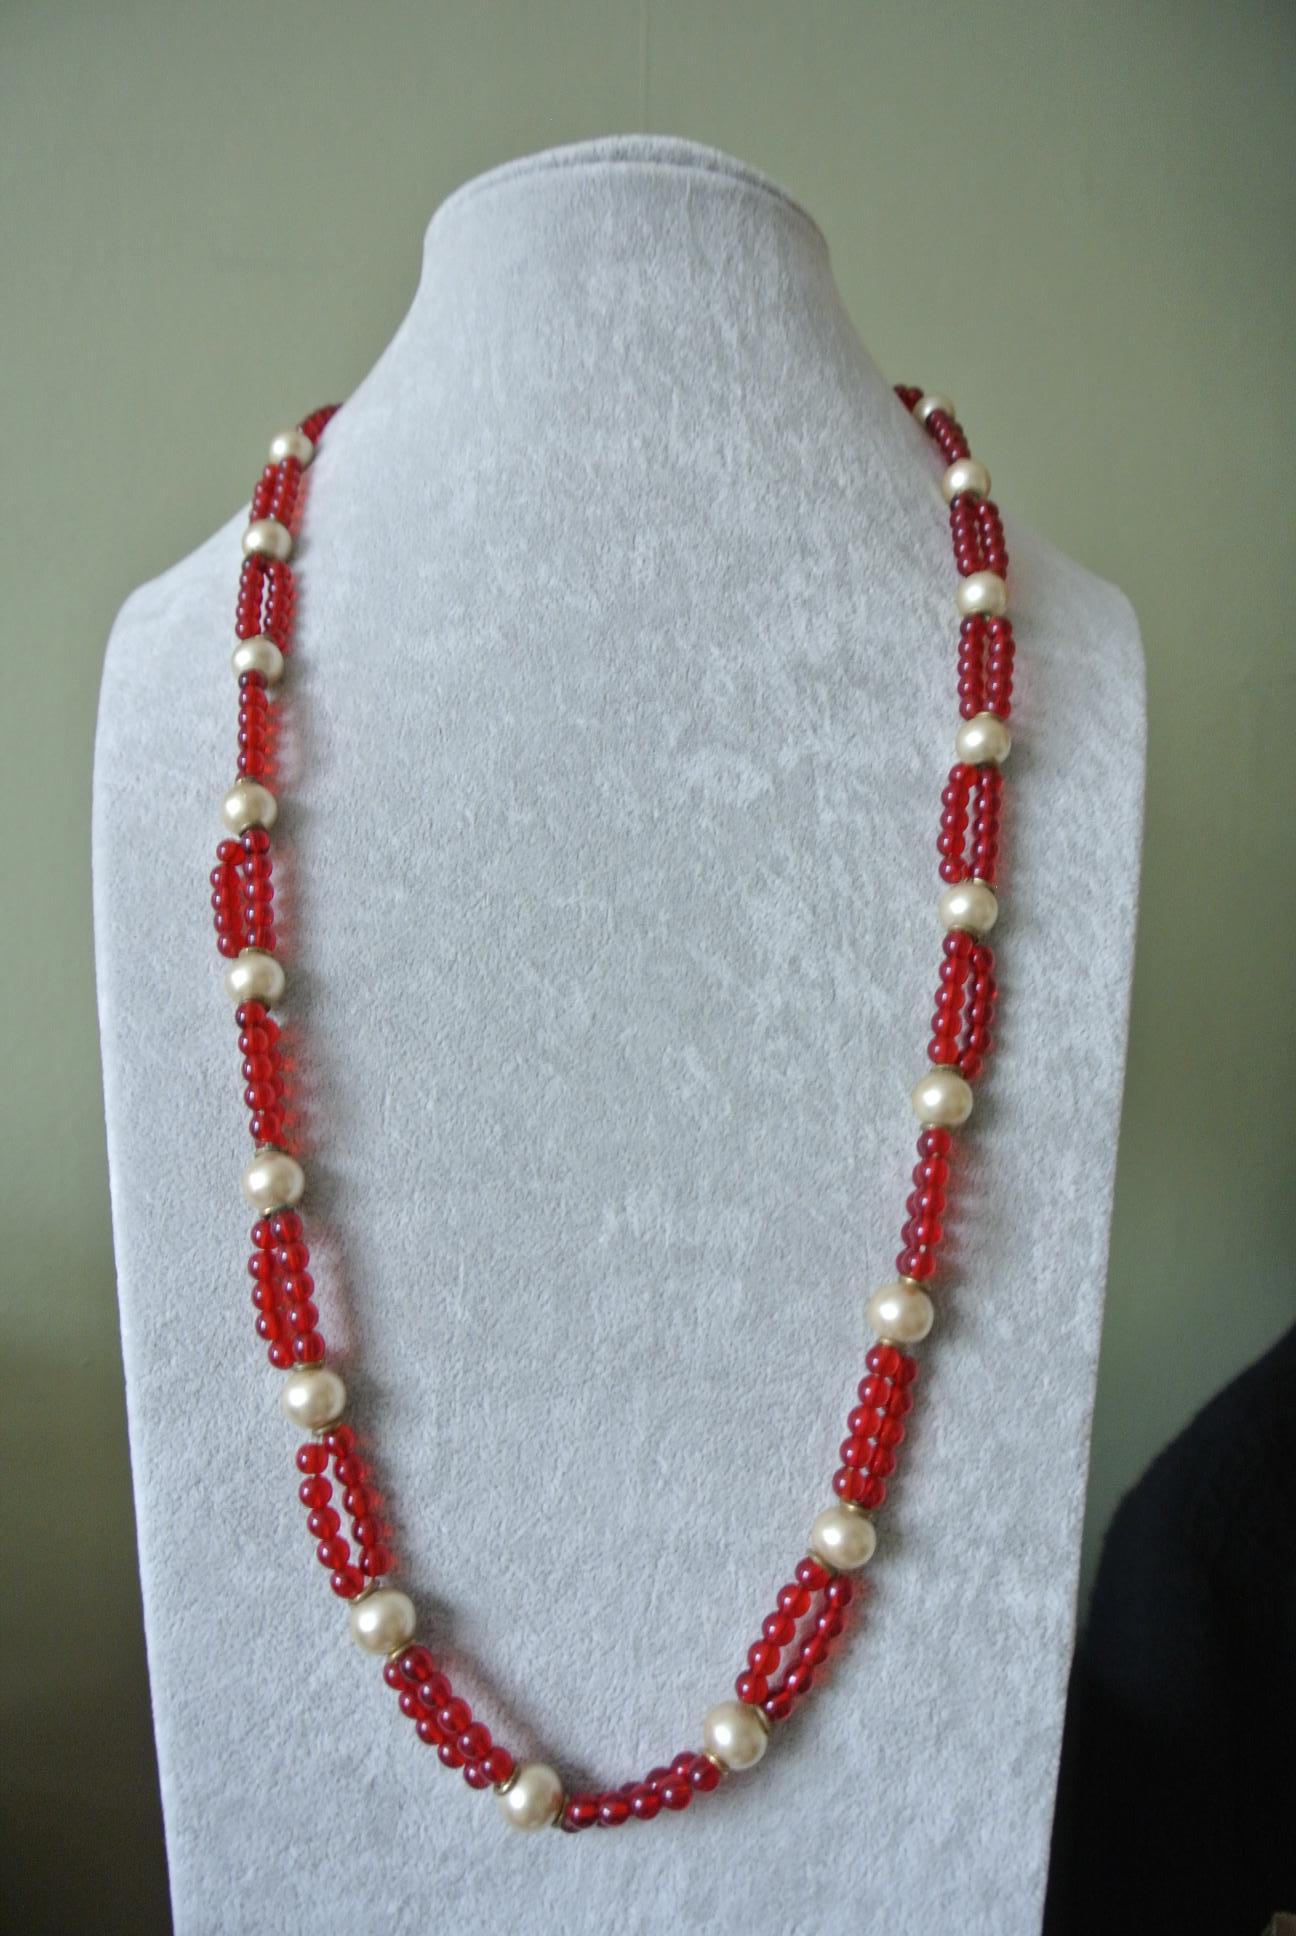 Chanel signed necklace
Designed by Robert goossens 
With red glass beads